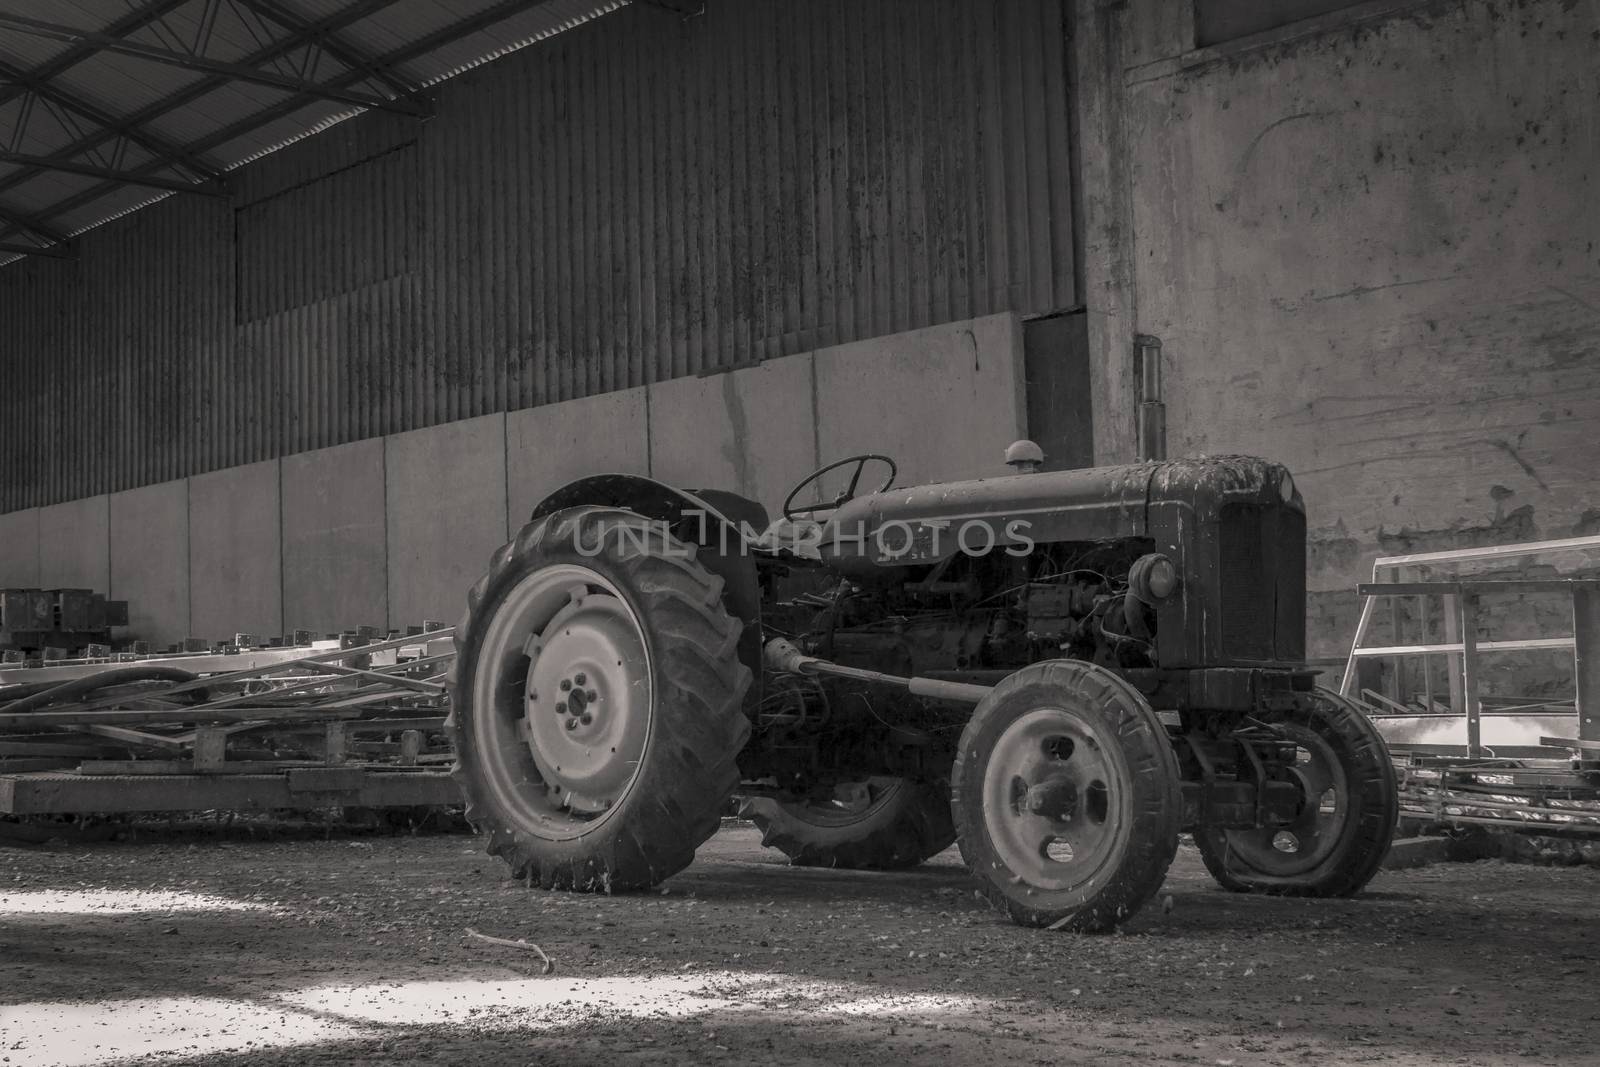 Old abandoned tractor in a shed. Full of dust and dirt left to itself was old and outdated.